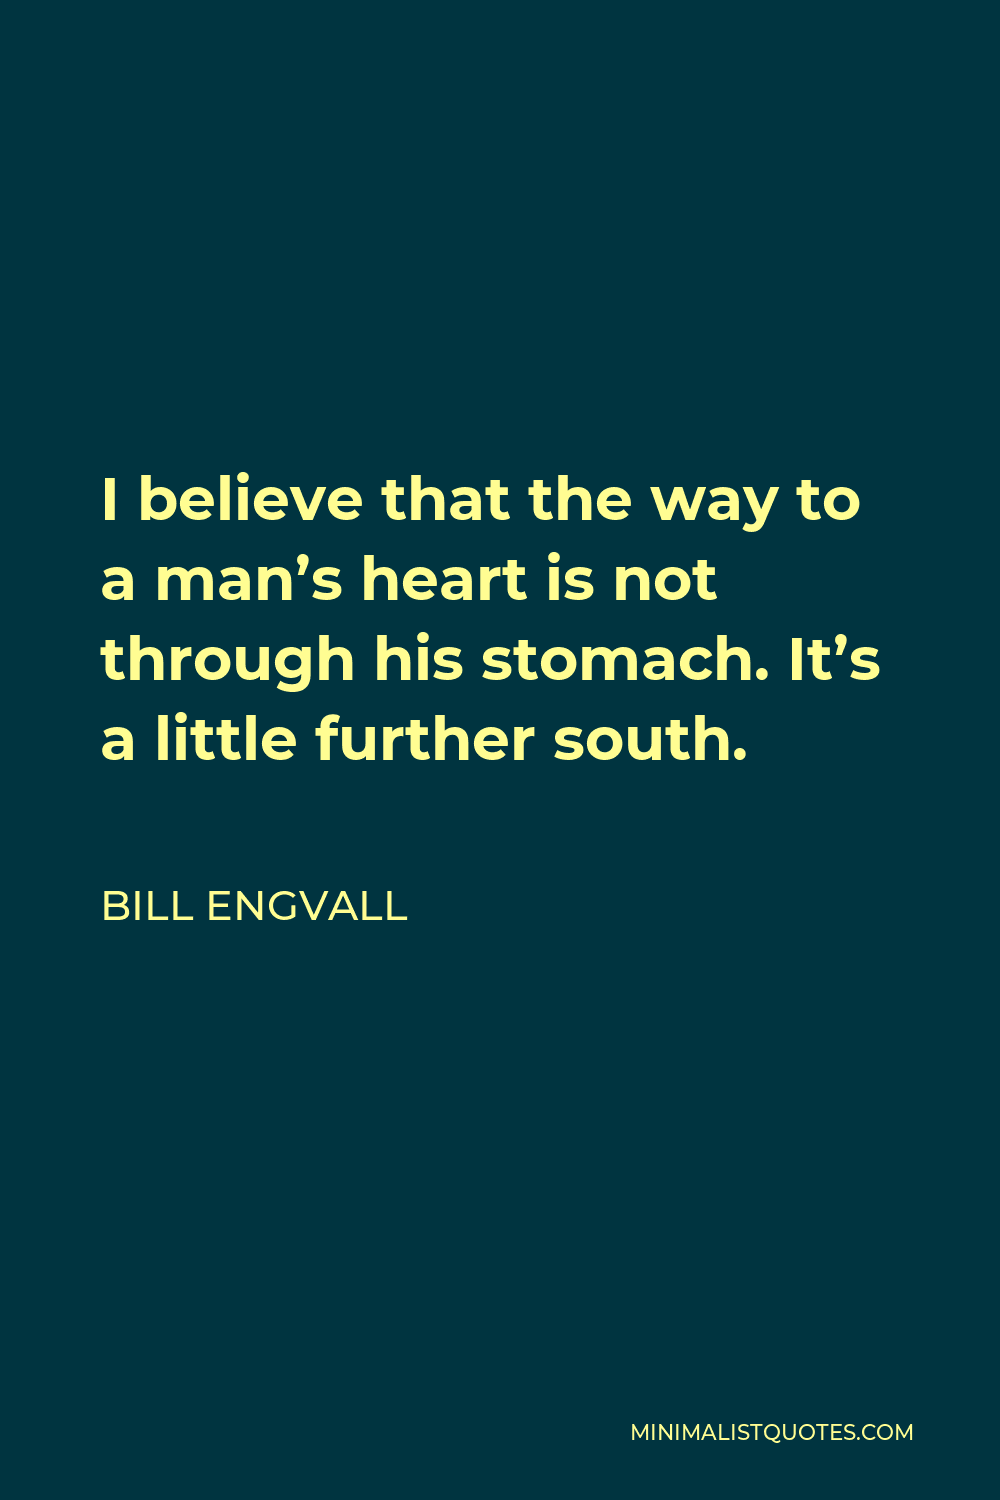 Bill Engvall Quote - I believe that the way to a man’s heart is not through his stomach. It’s a little further south.